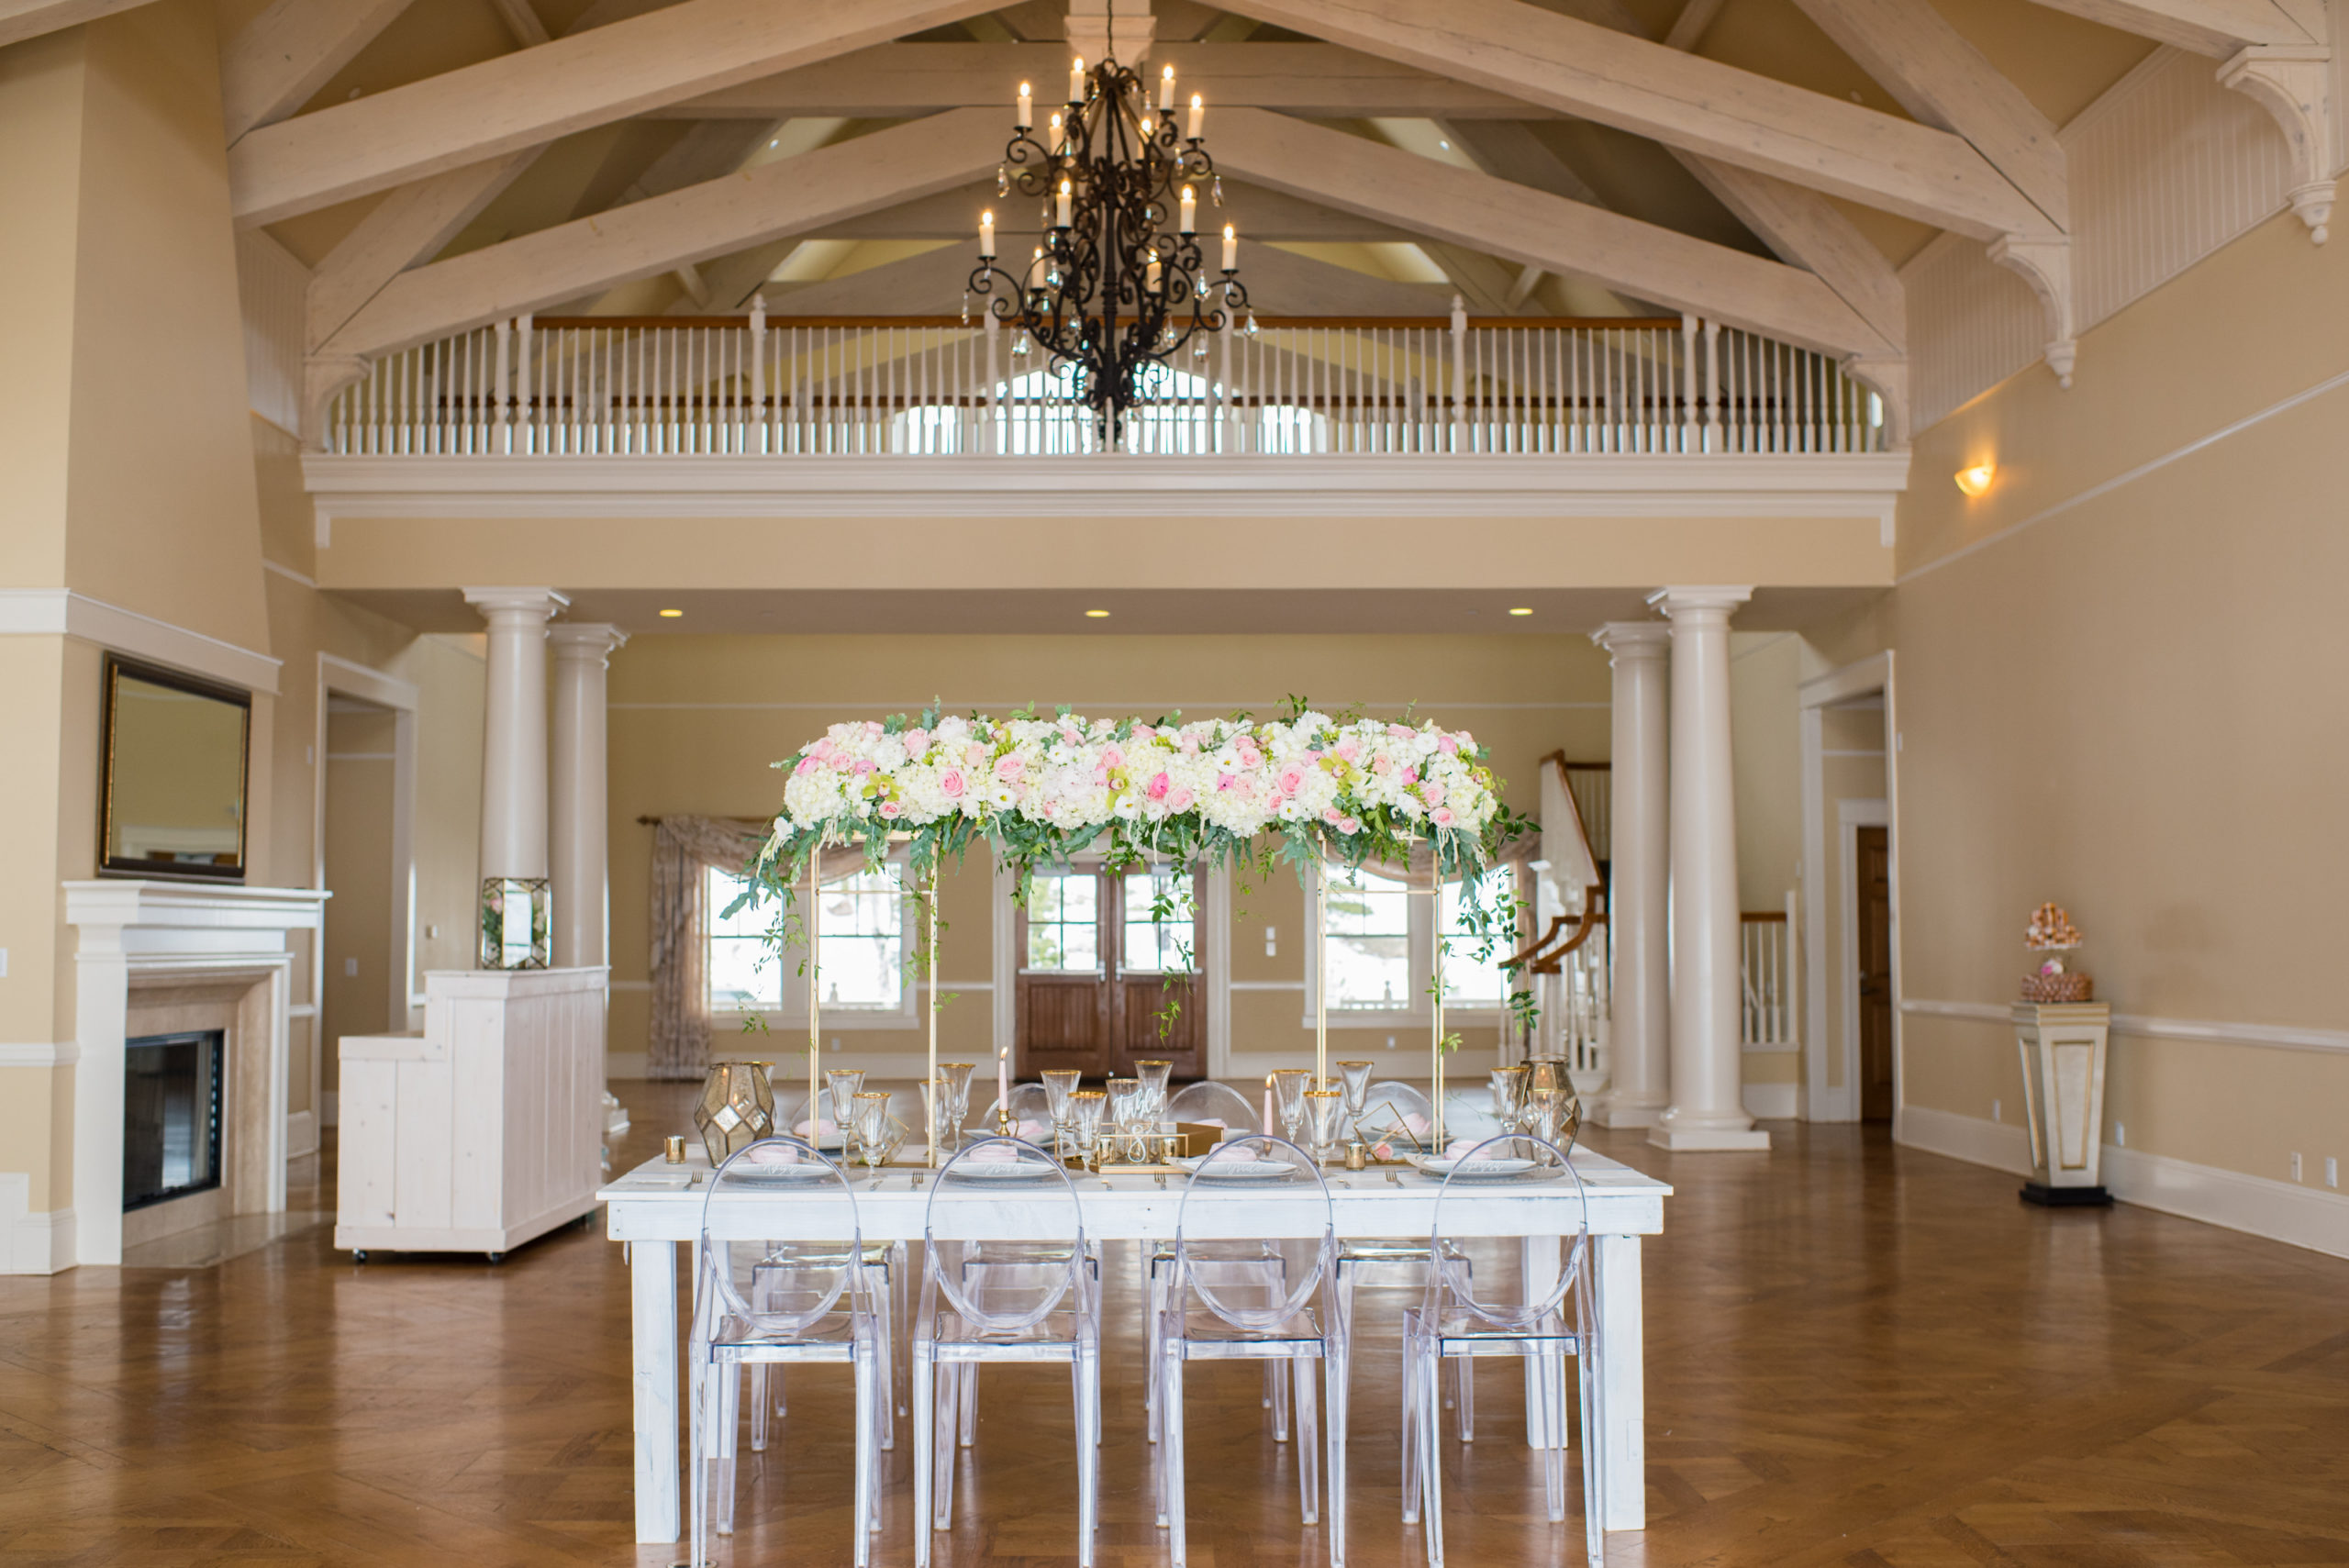 Reception room of the Flying Horse Ranch Wedding venue